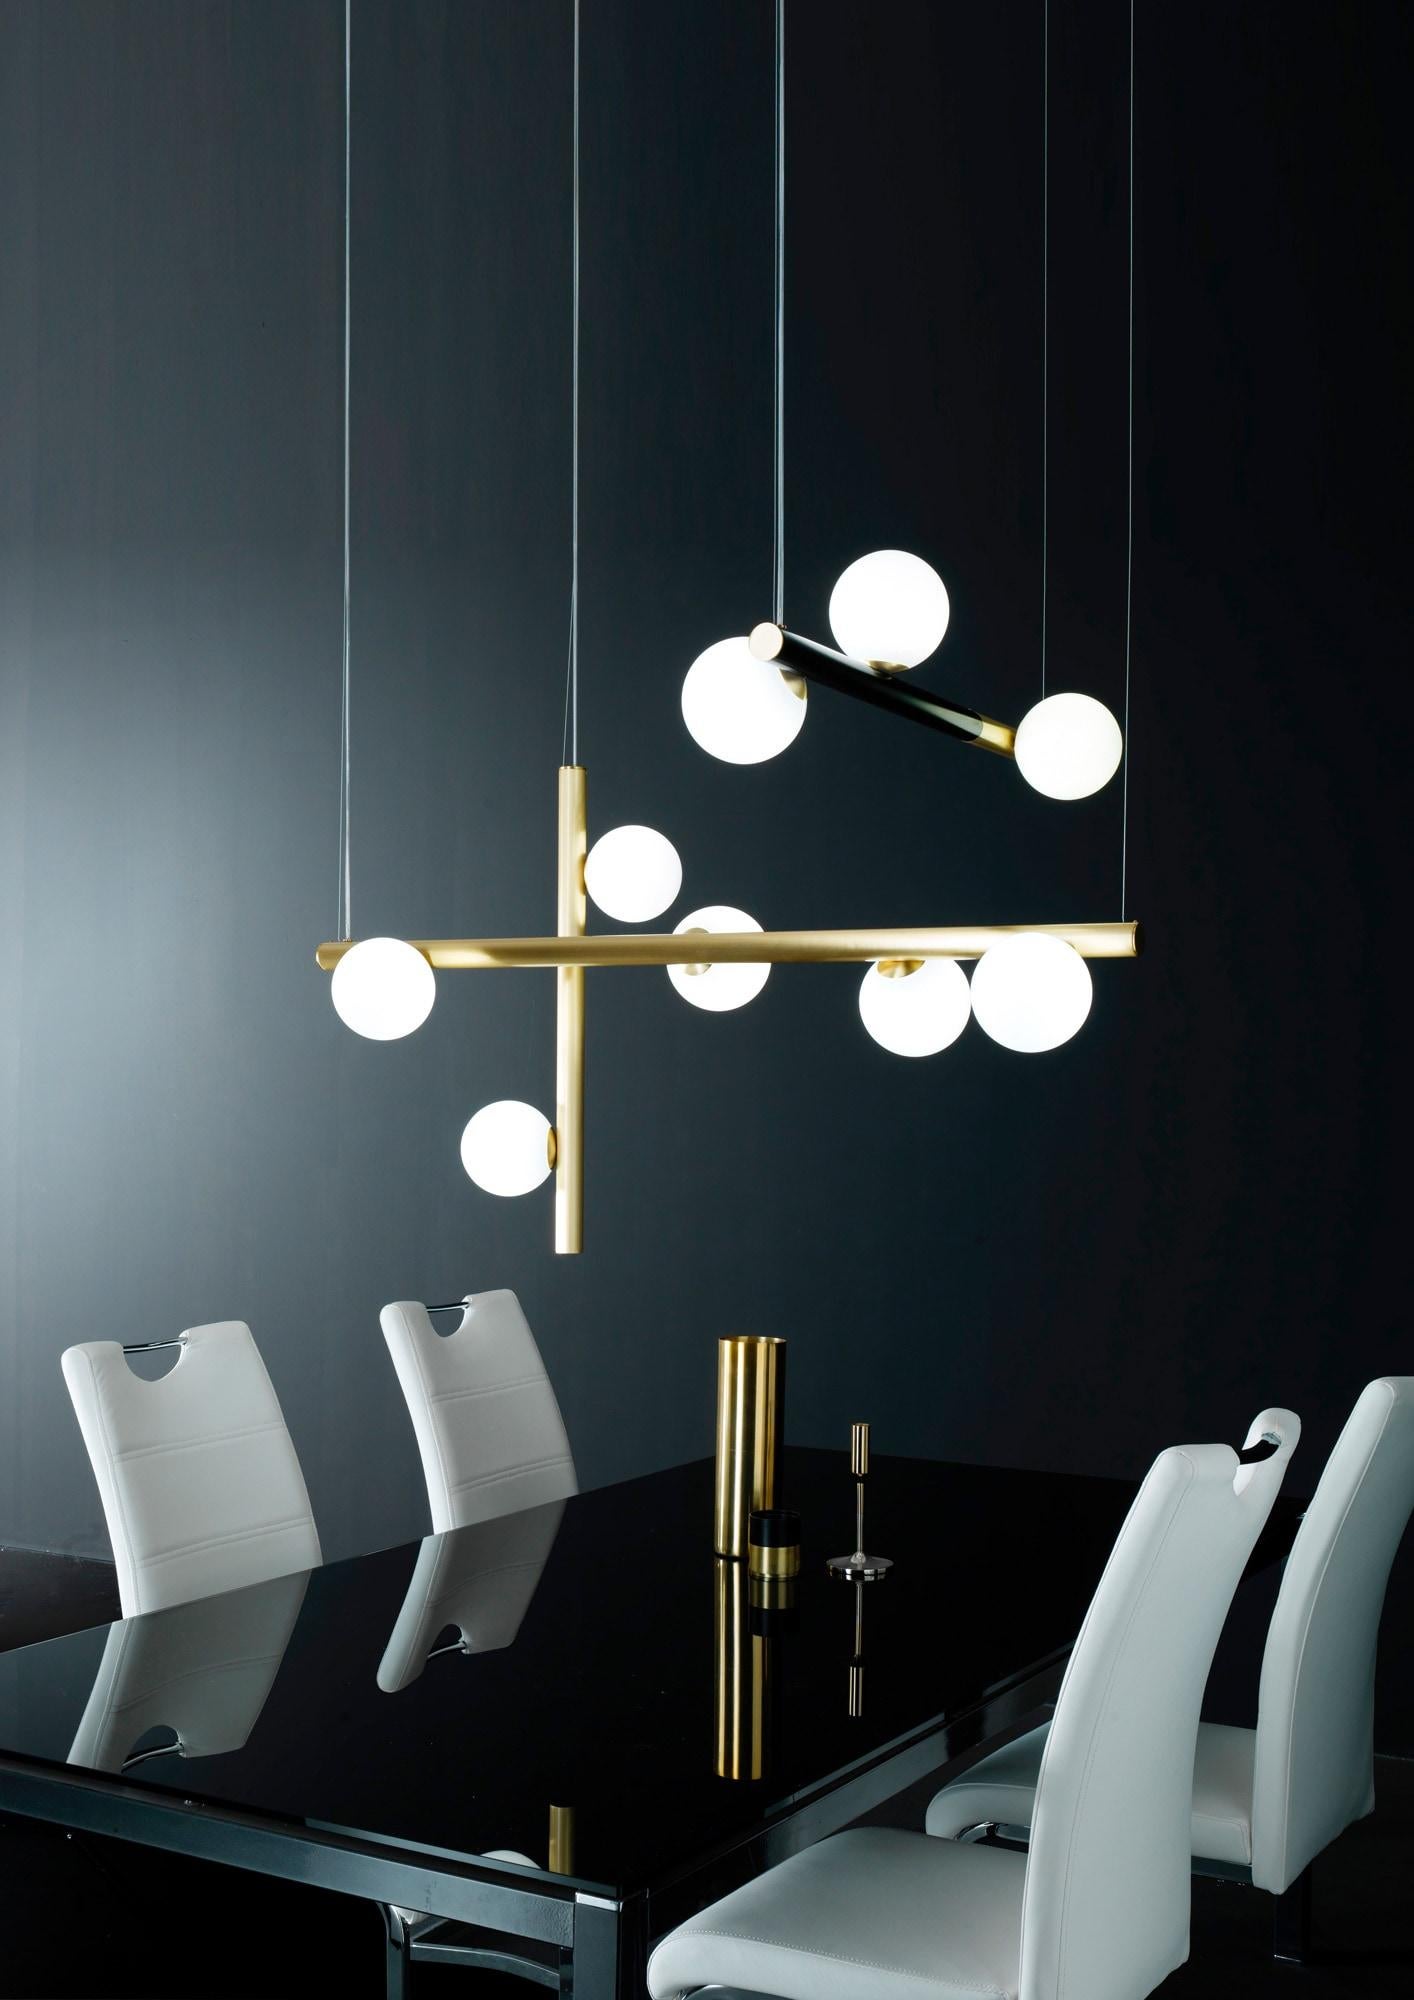 Customizable chandelier in length, layout (vertical or horizontal), and number of glass spheres. “Diana” is available in a single finish or in a double finish (Satin brass + Matt black). The glass spheres have our characteristic “Pulegoso” effect.
